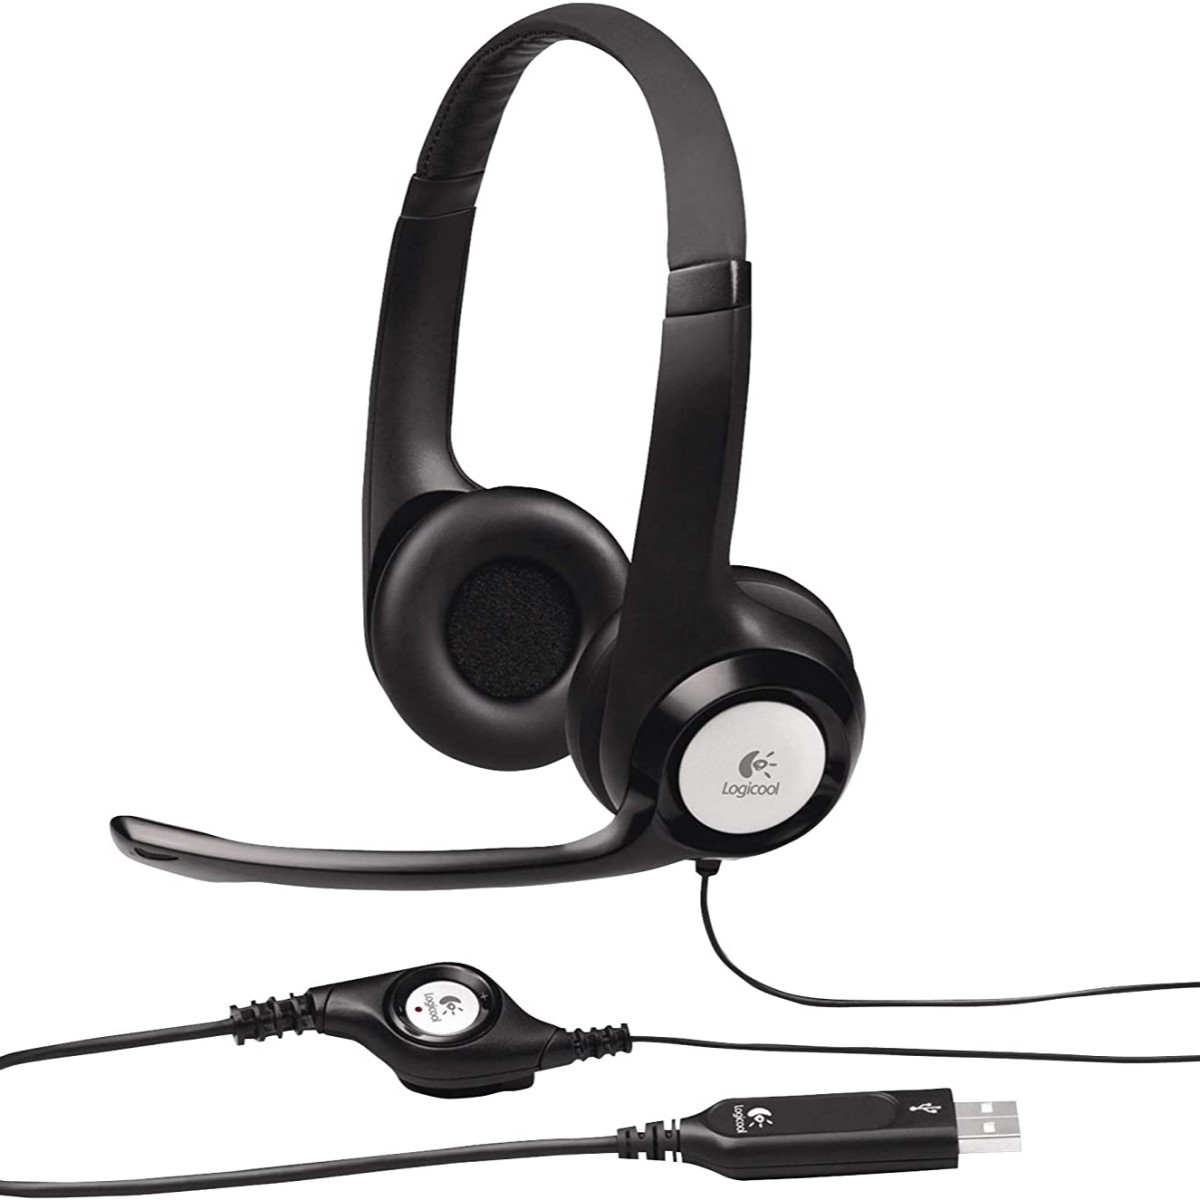 Logitech USB Headset H390 With Noise Cancelling Mic TabalOnline